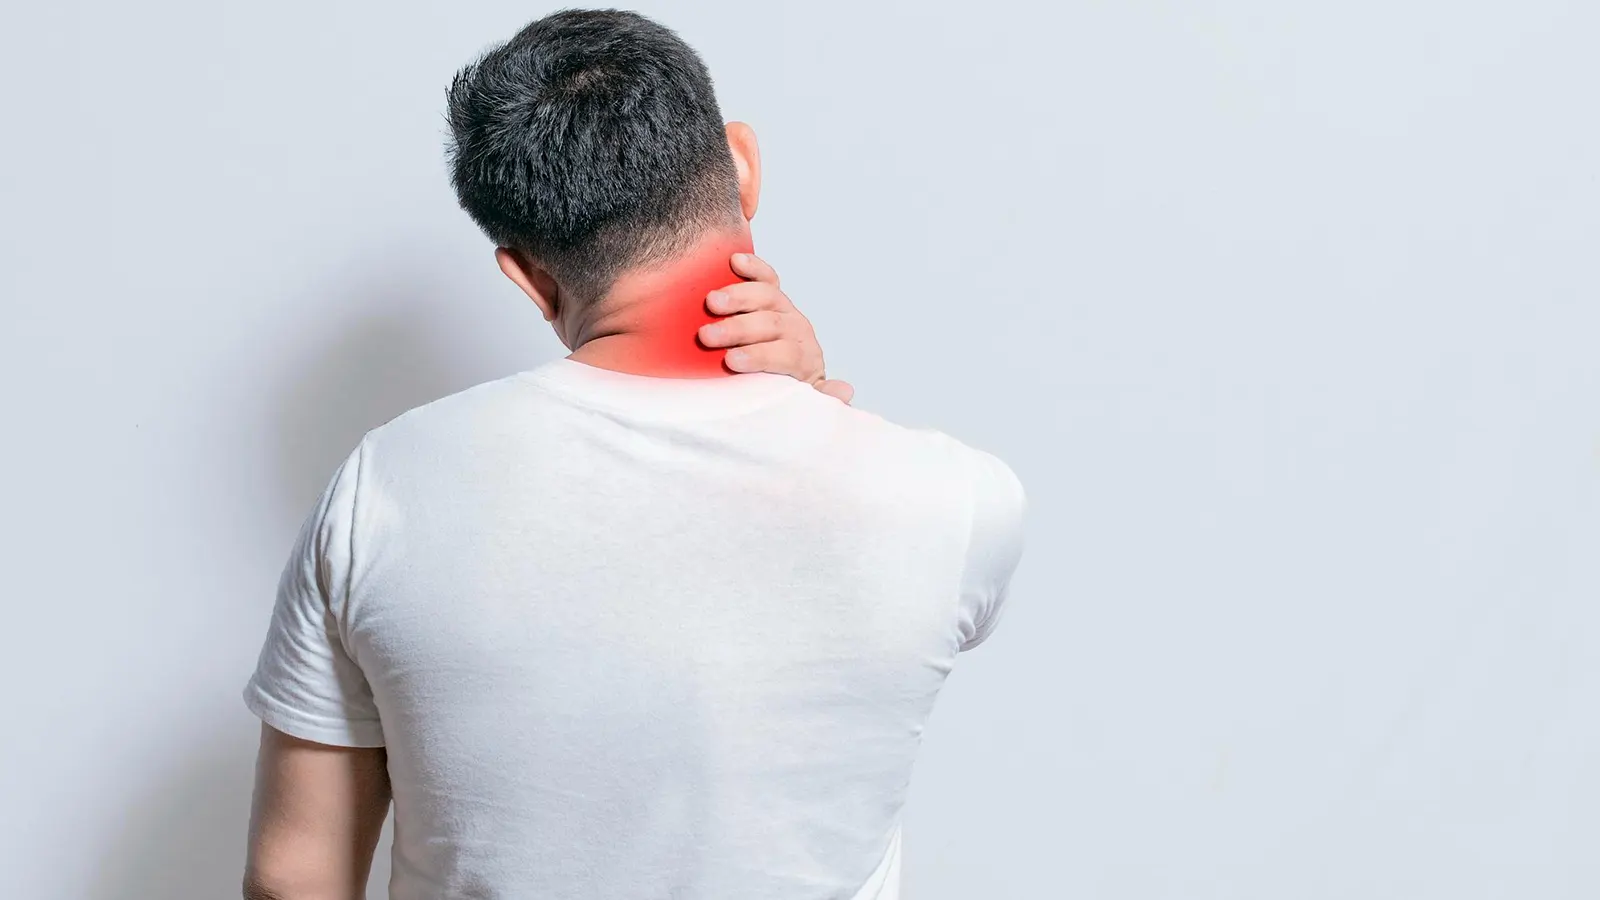 What is a Neck Hernia? How is Treated?